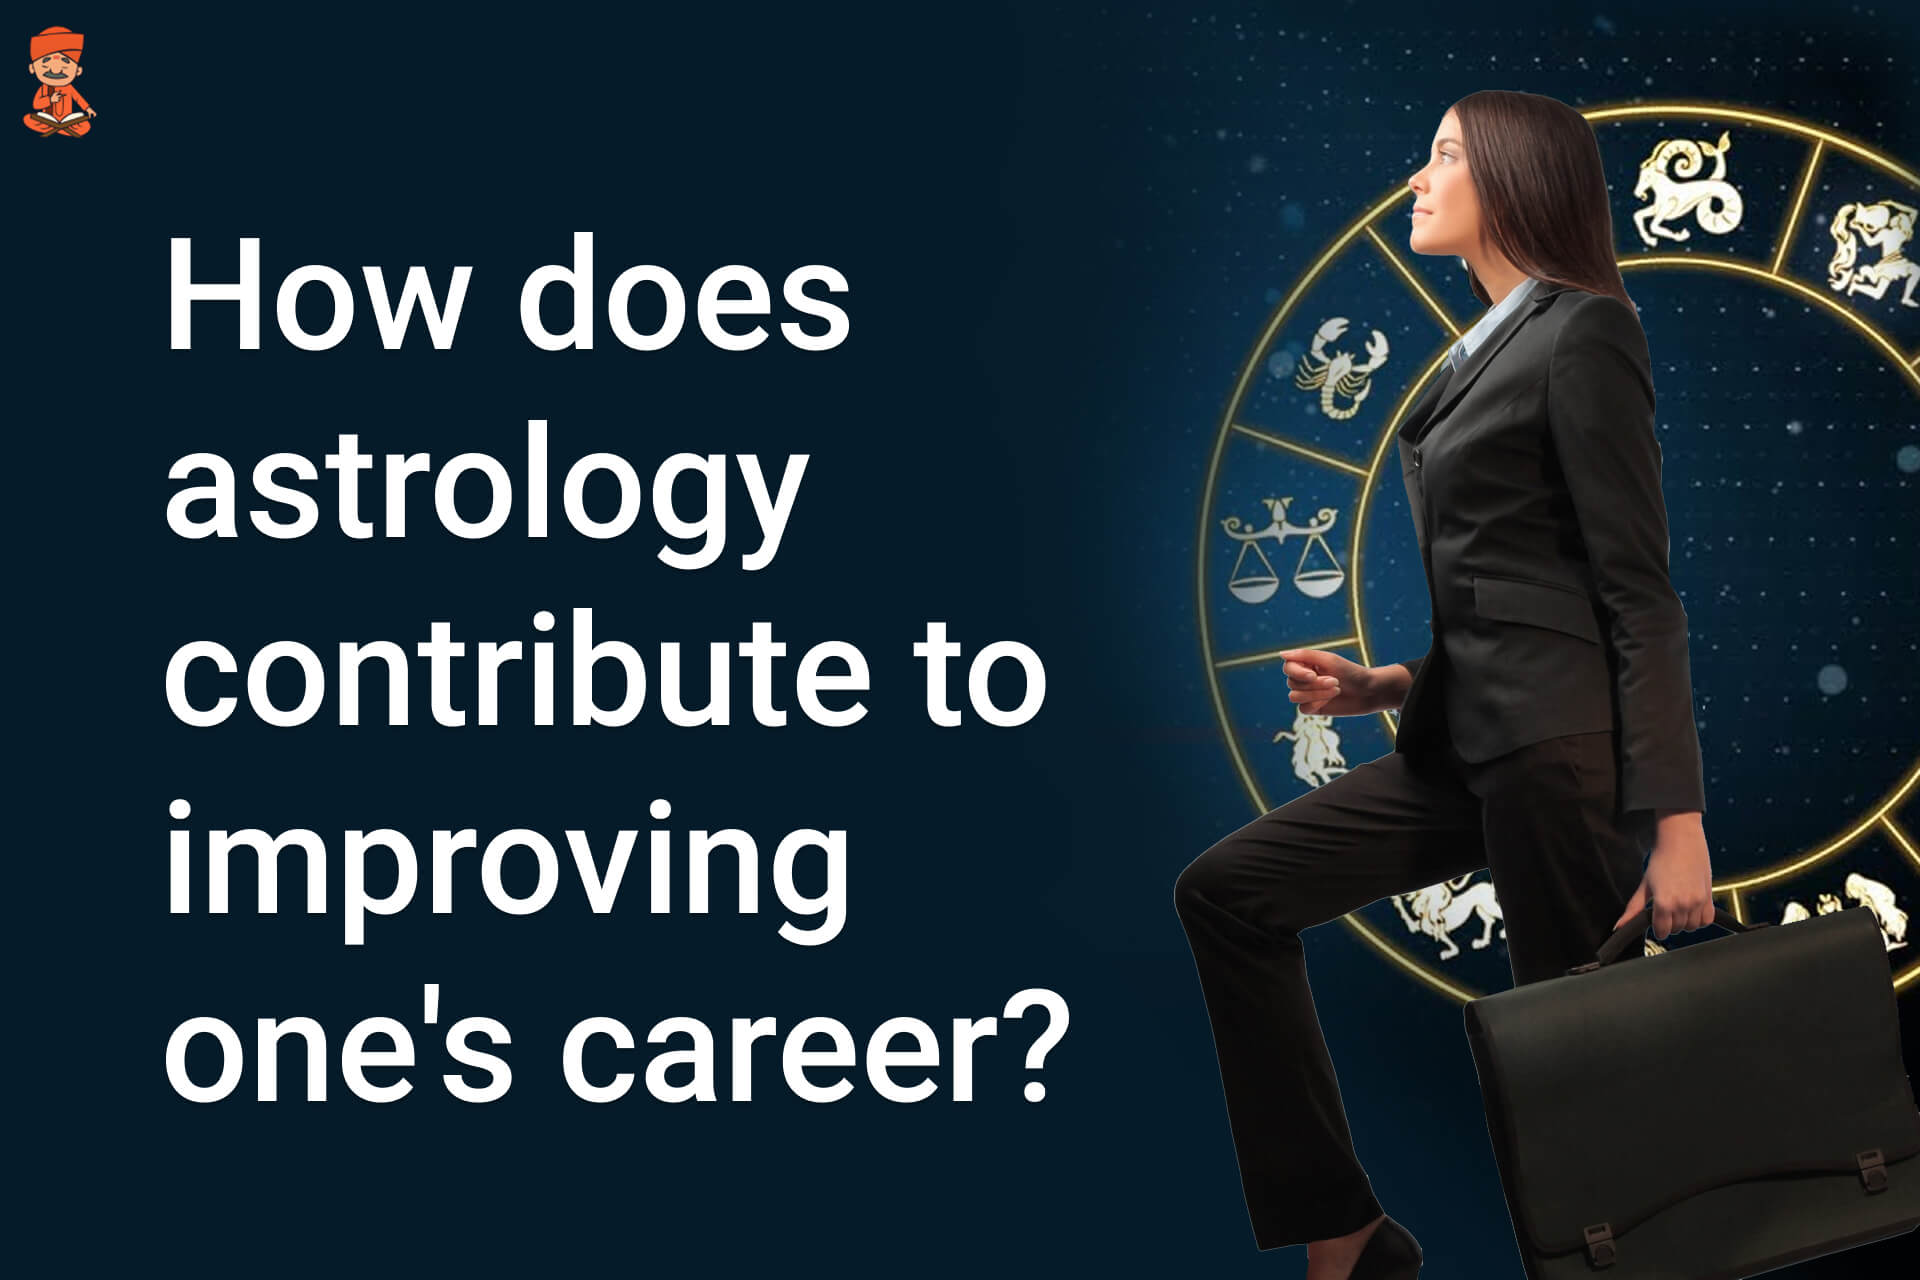 How Does Astrology Contribute To Improving One’s Career?